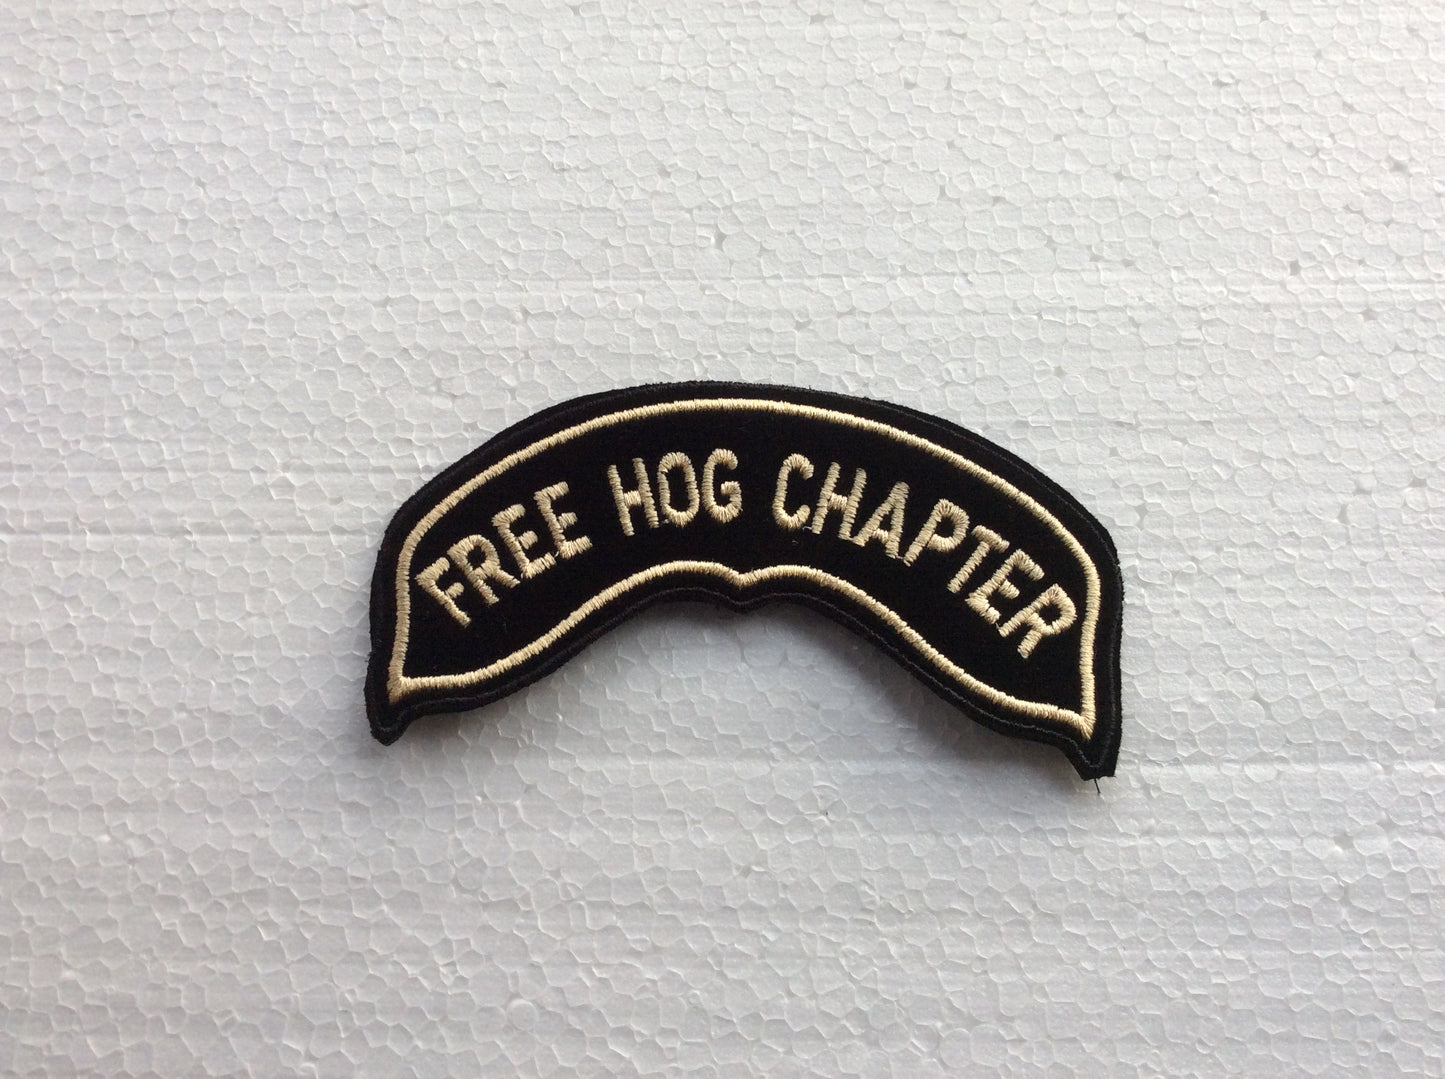 Pequeno parche patch roker FREE HOG CHAPTER